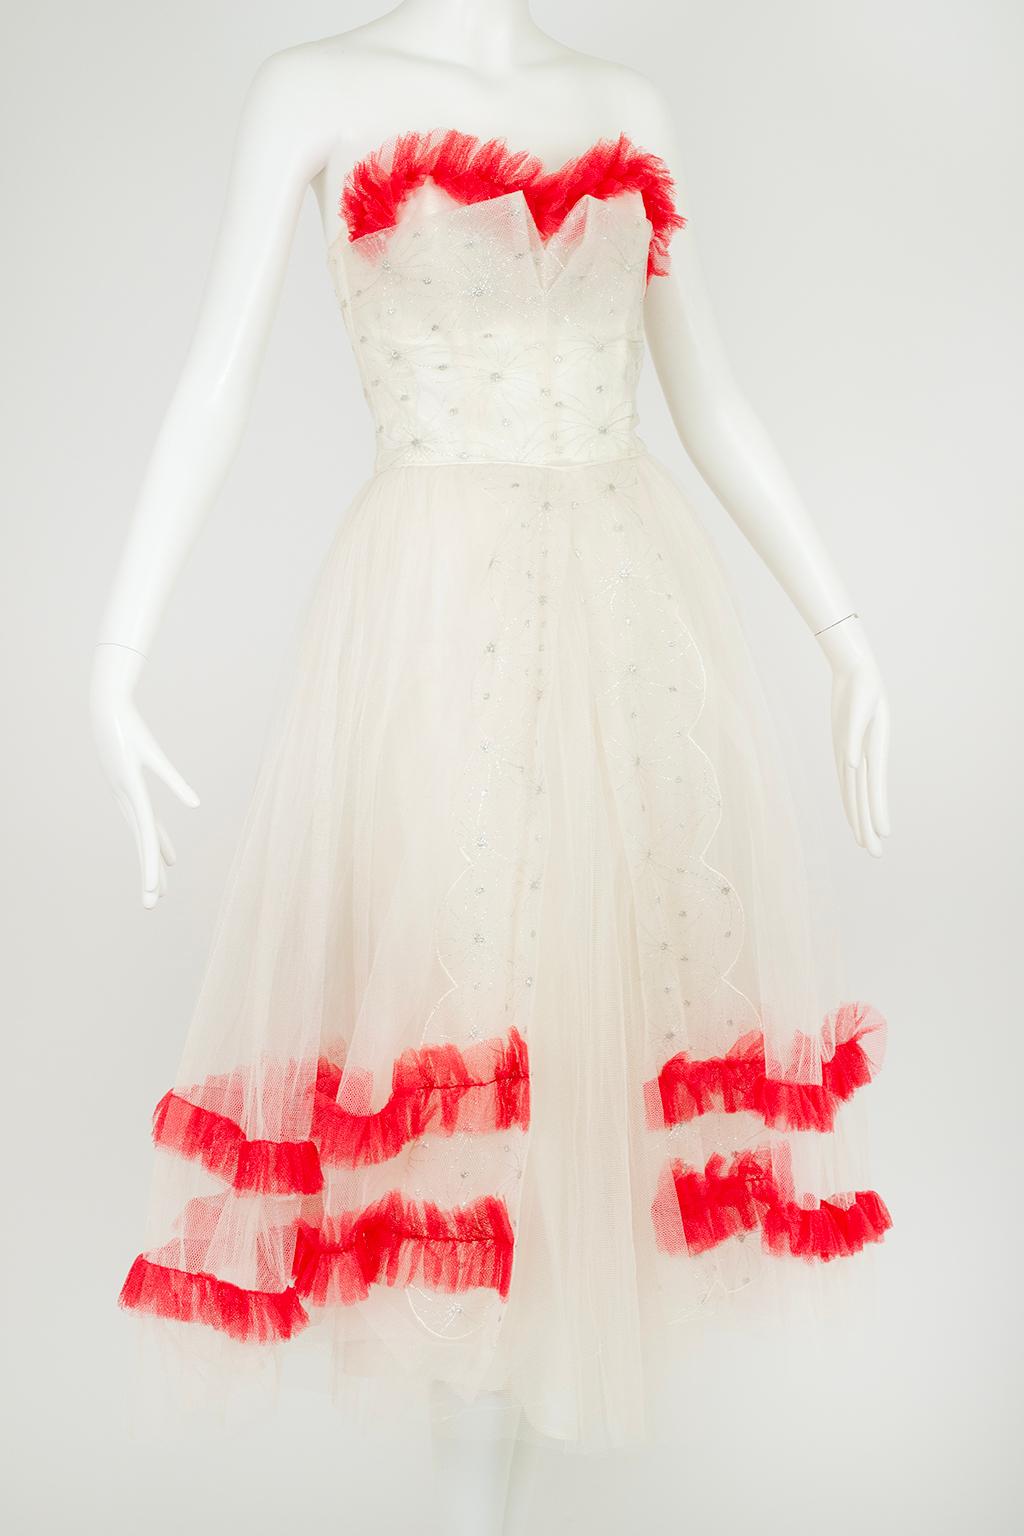 Women's White and Silver Ballerina or Wedding Dress with Removable Red Trim – XS, 1950s